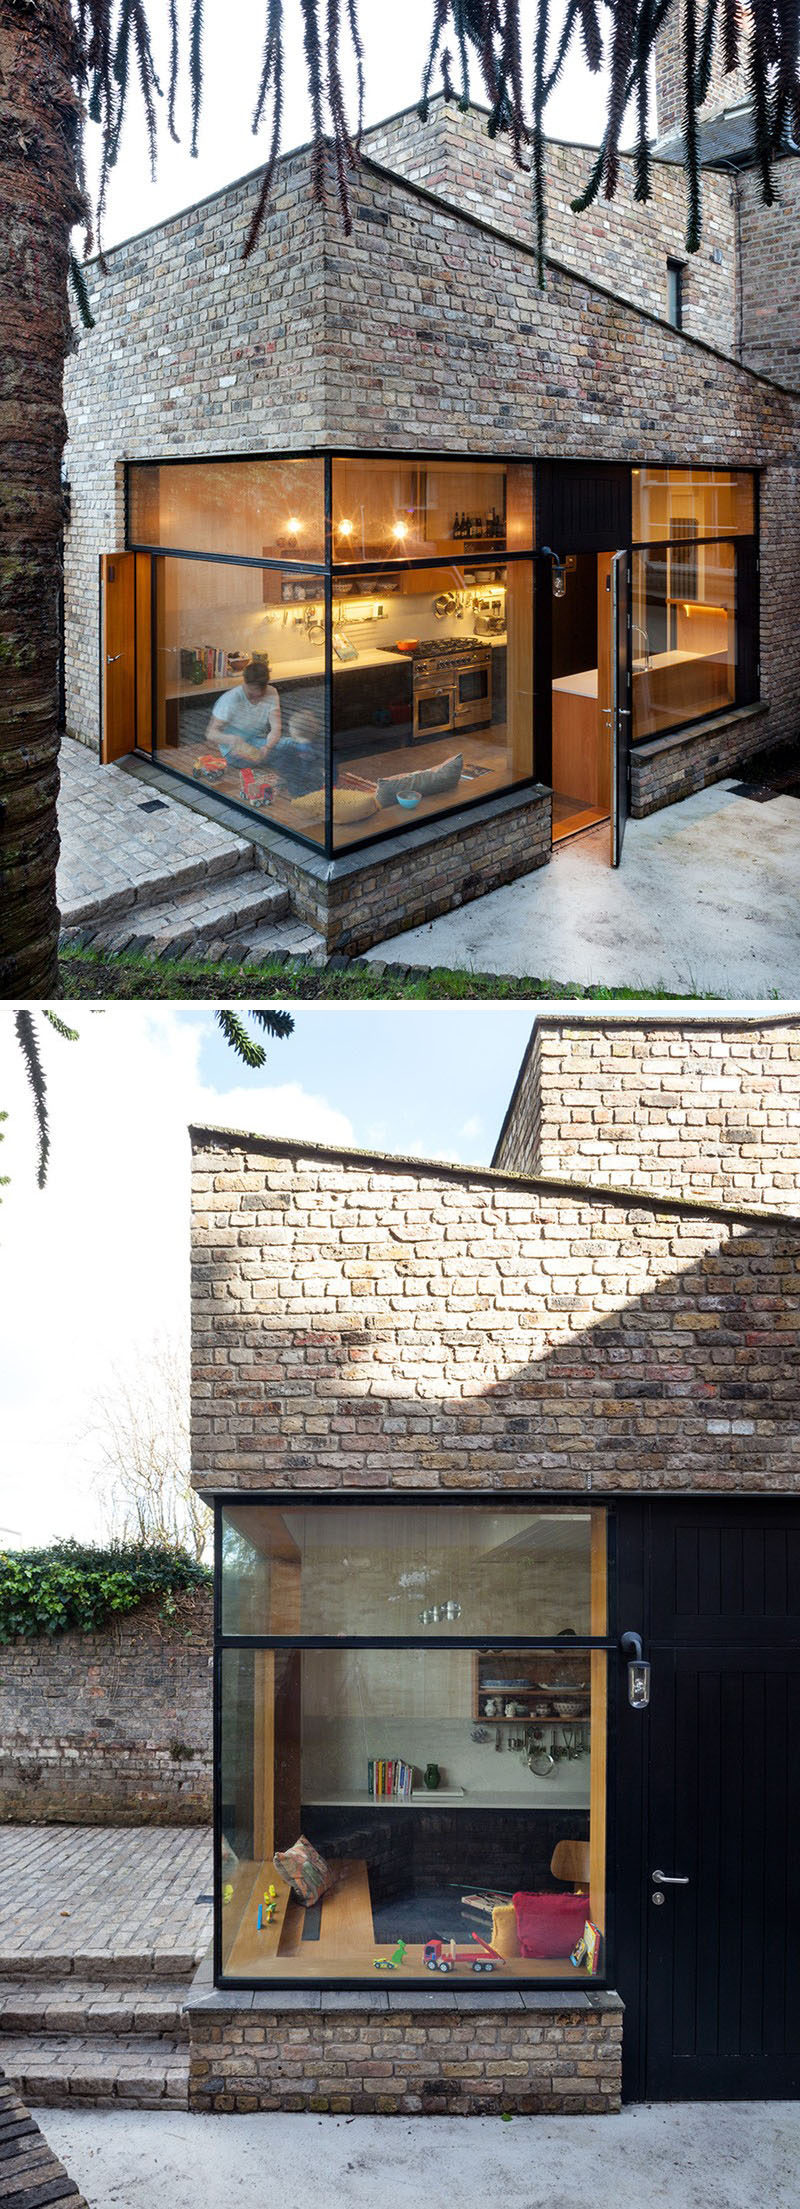 14 Modern Houses Made Of Brick // This brick extension matches the rest of the brick exterior and features large windows to maximize the amount of natural light in the home.